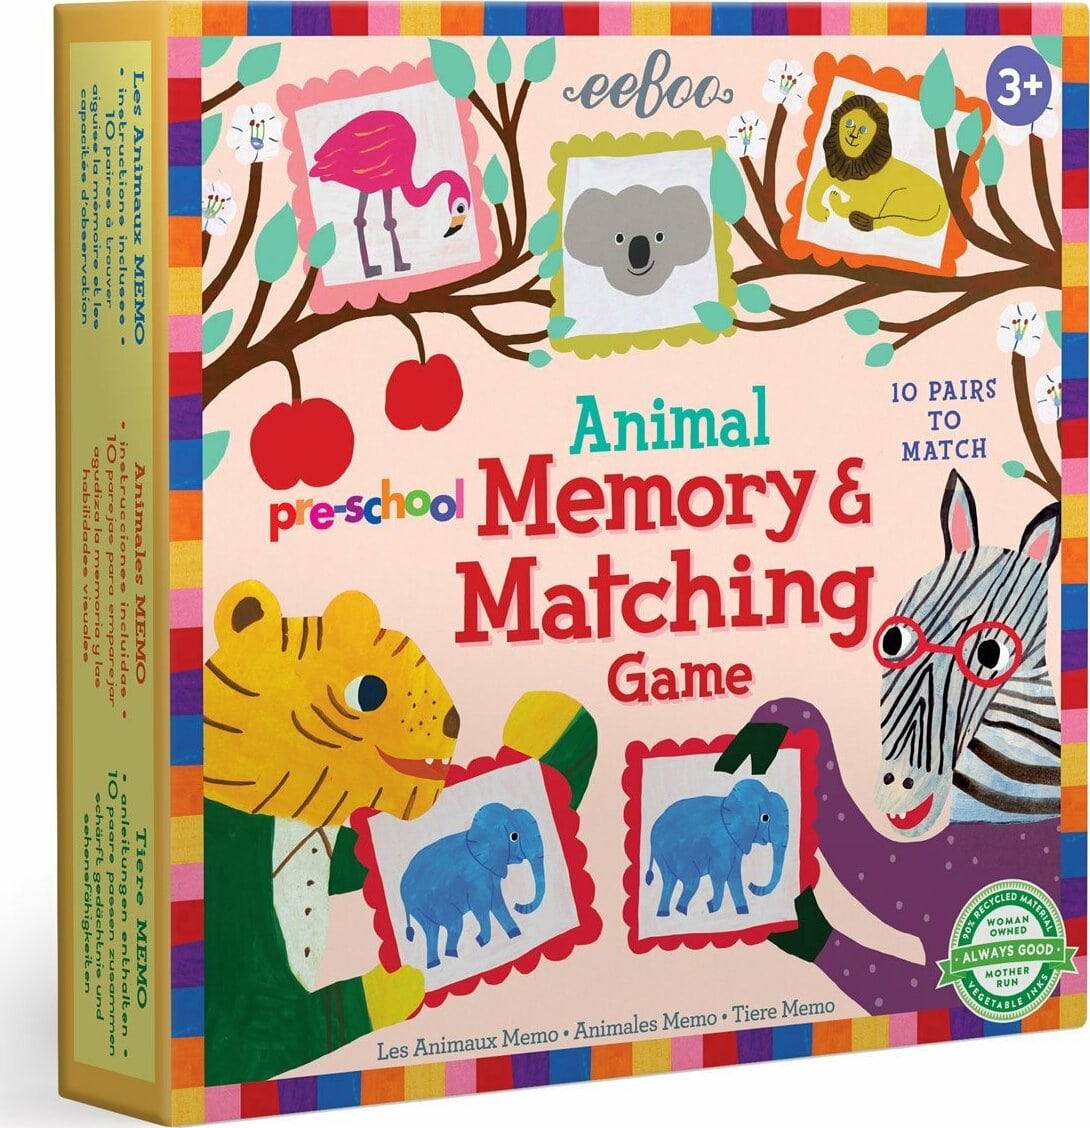 Animal Memory Matching Game - A Child's Delight